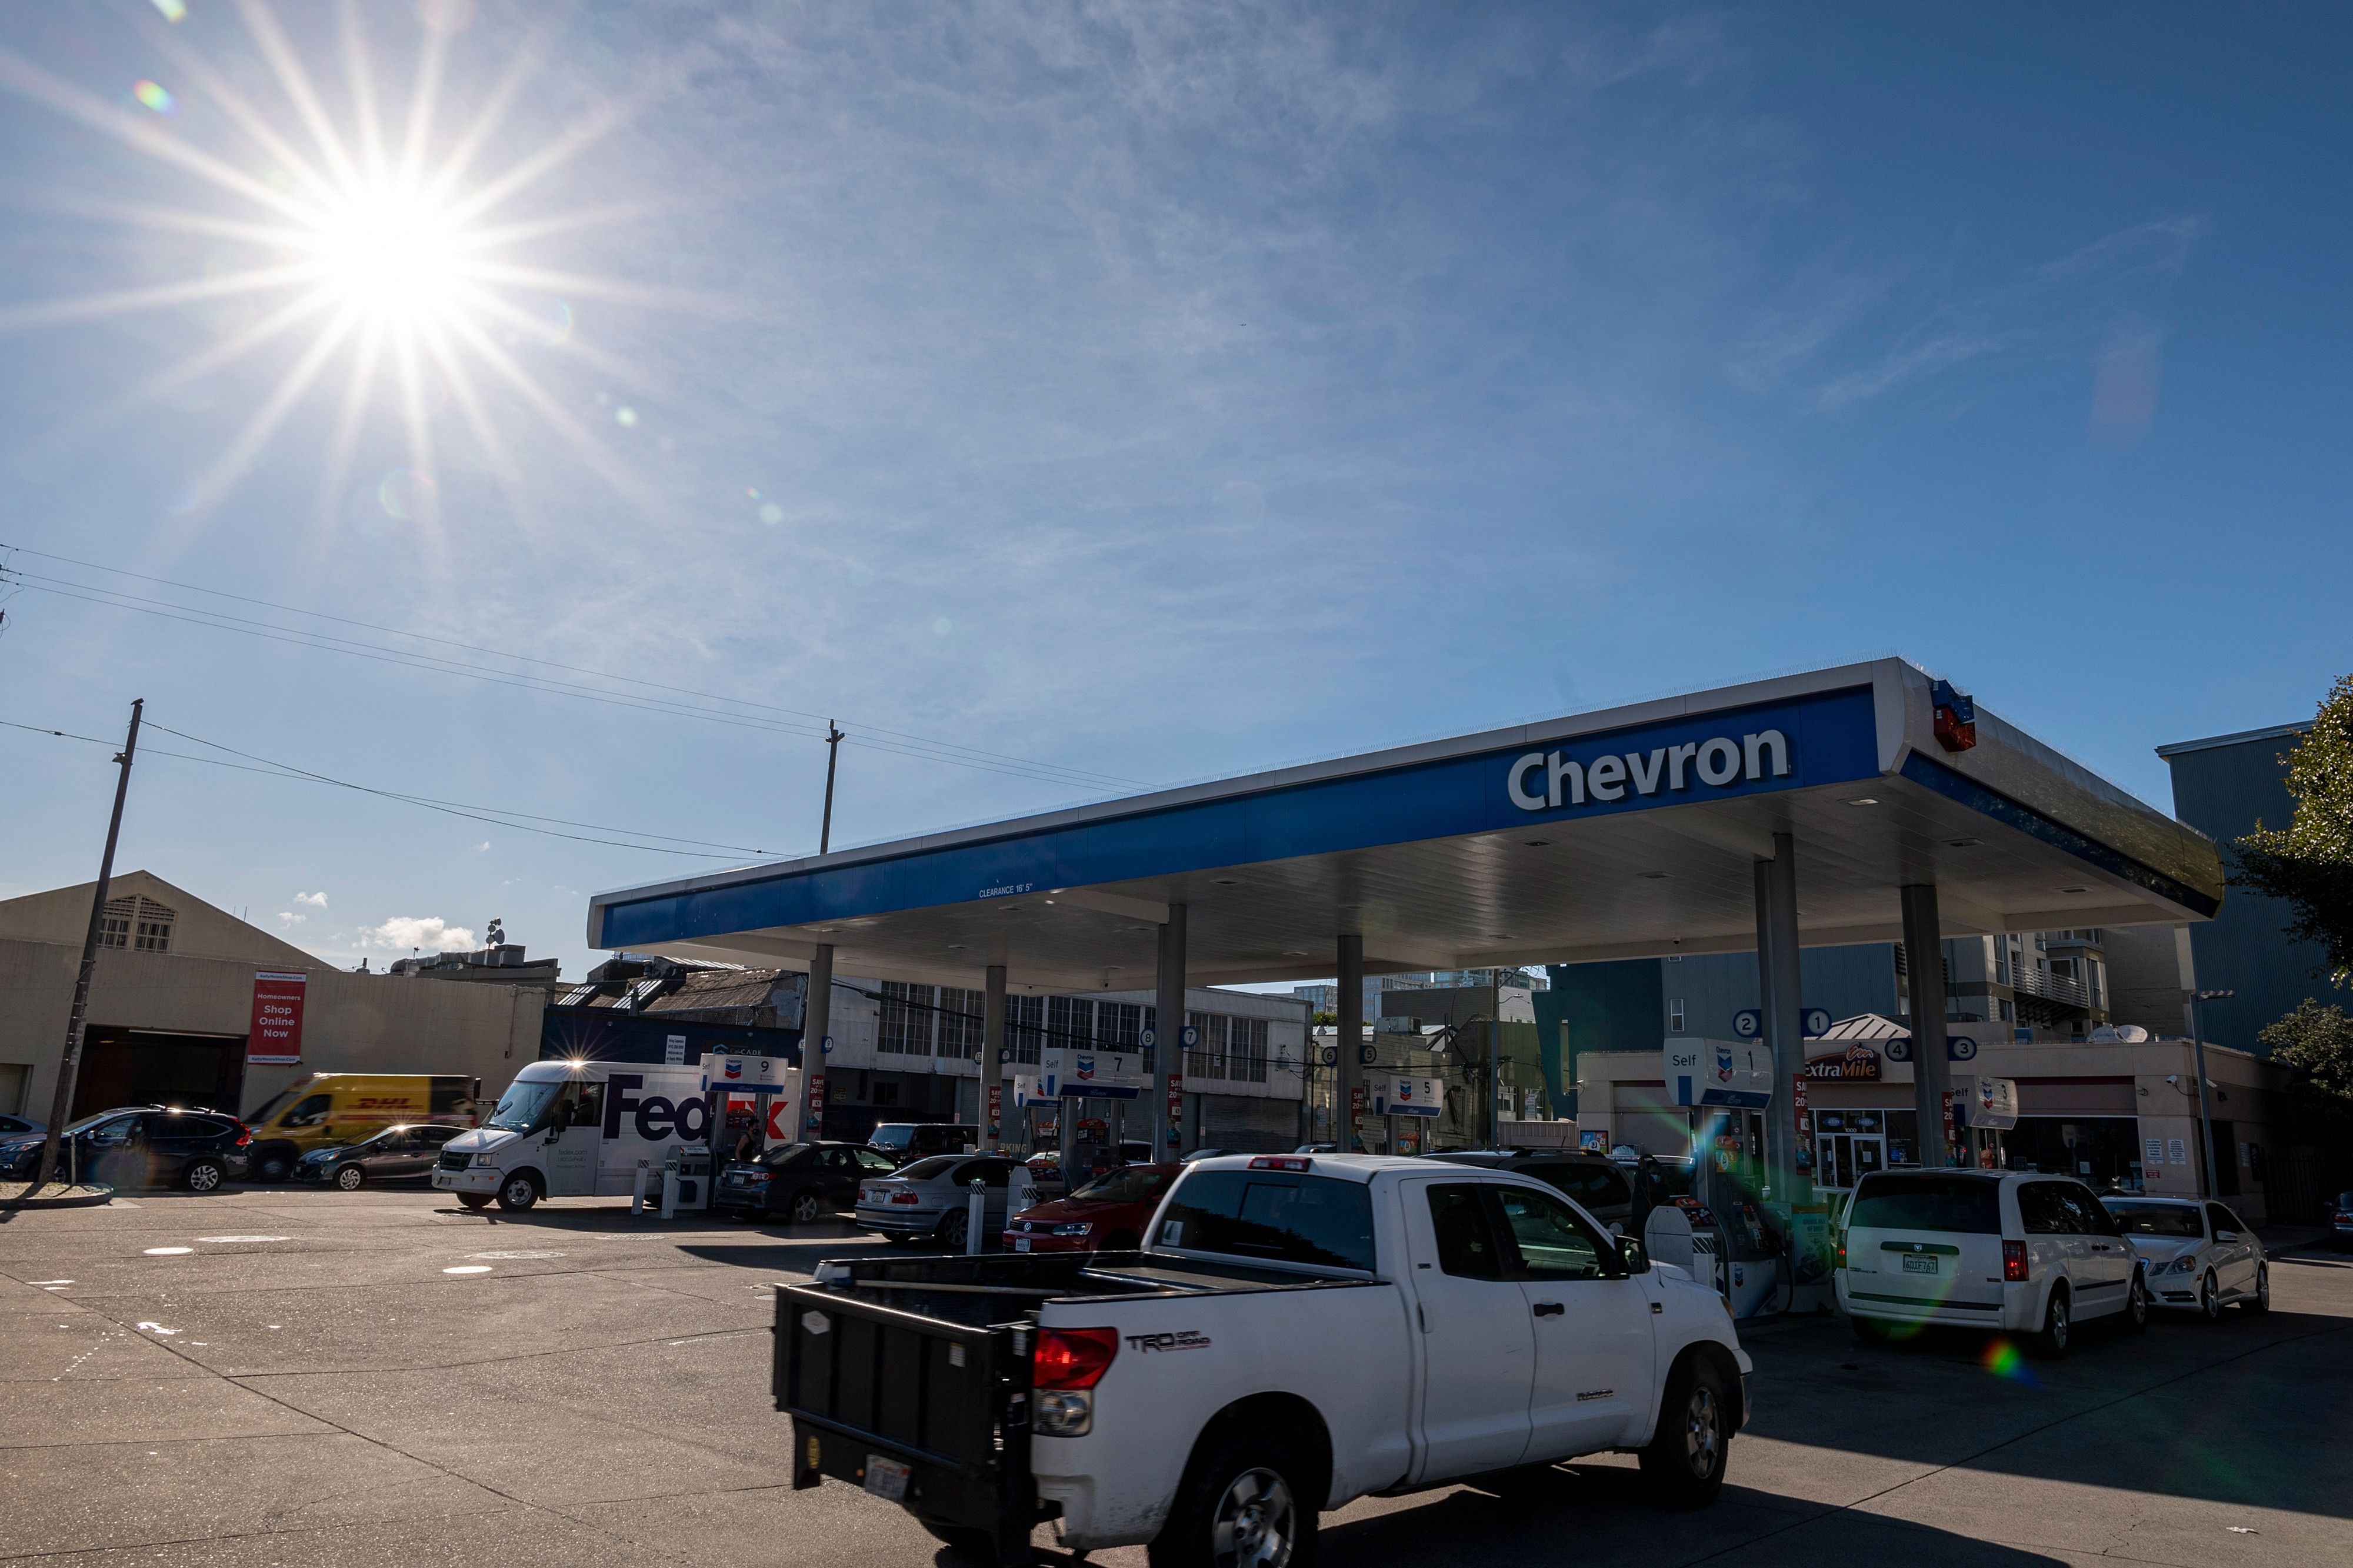 Cars line up at a Chevron Corp. gas station in San Francisco, California, U.S., on Thursday, March 11